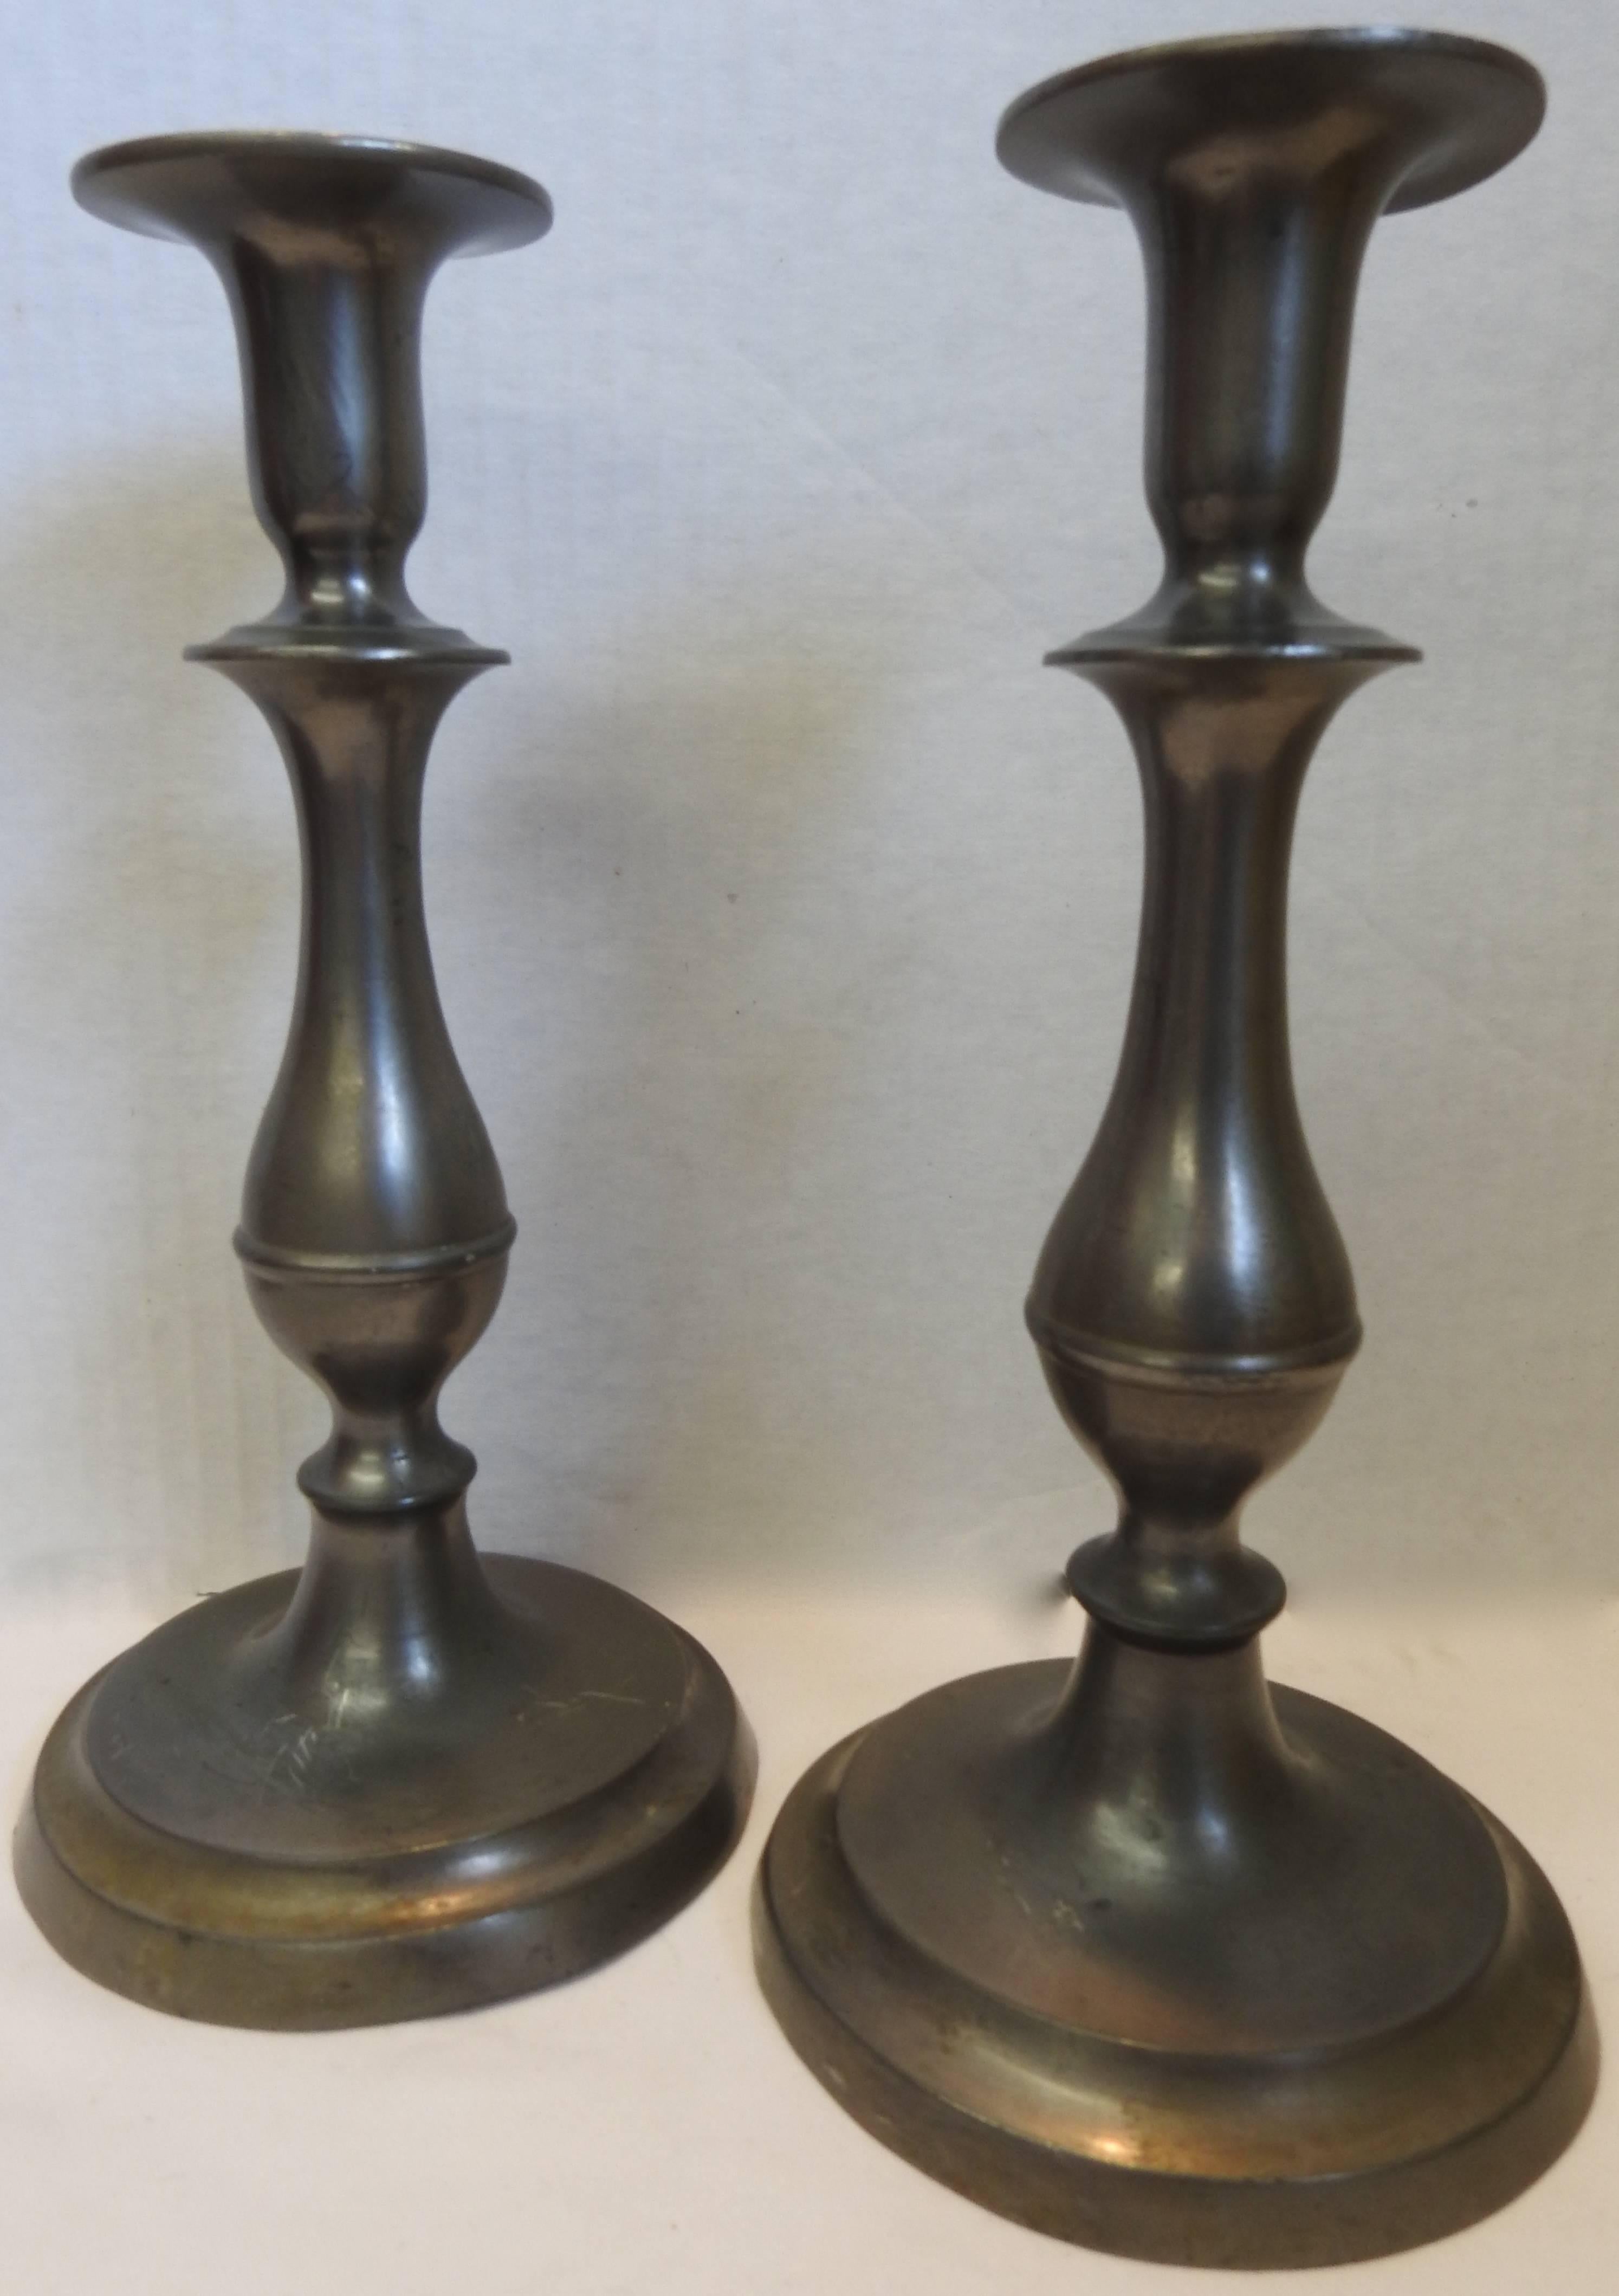 These are Classic Colonial style tall candlesticks to add beauty to your surroundings. The graceful lines take you back to yesteryear. Solid Pewter that has aged to a beautiful patina.